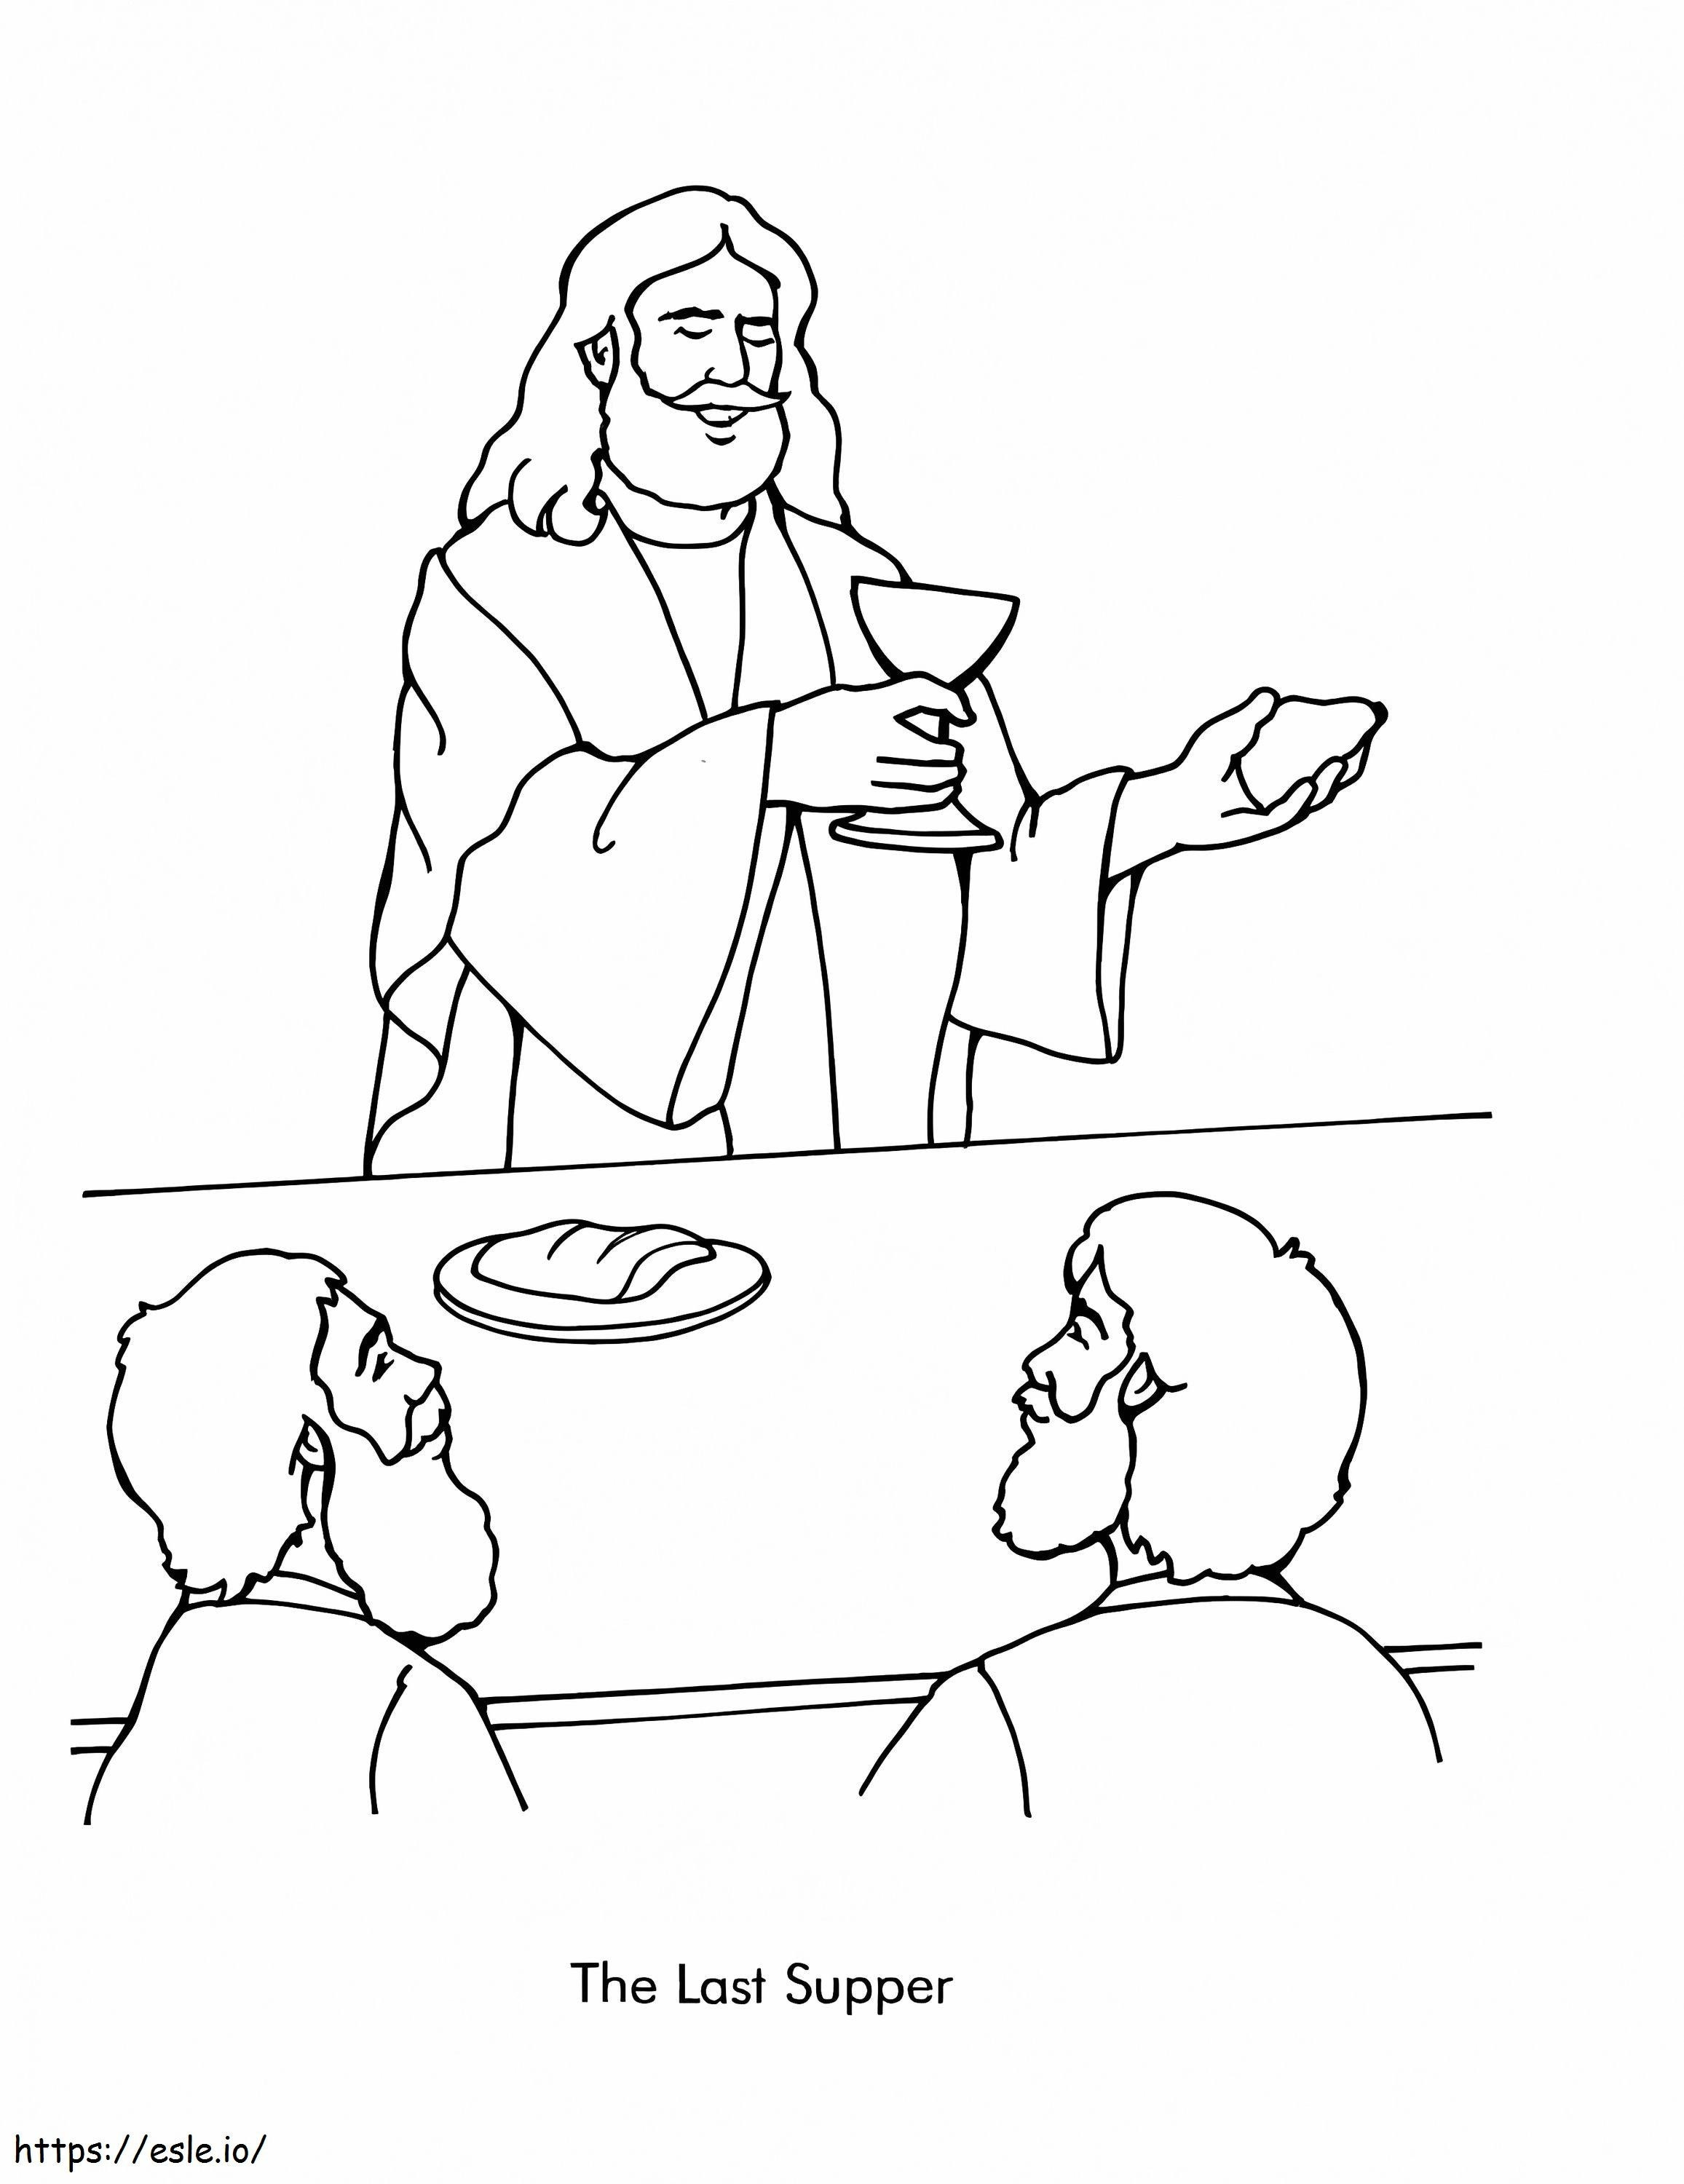 The Last Supper 6 coloring page